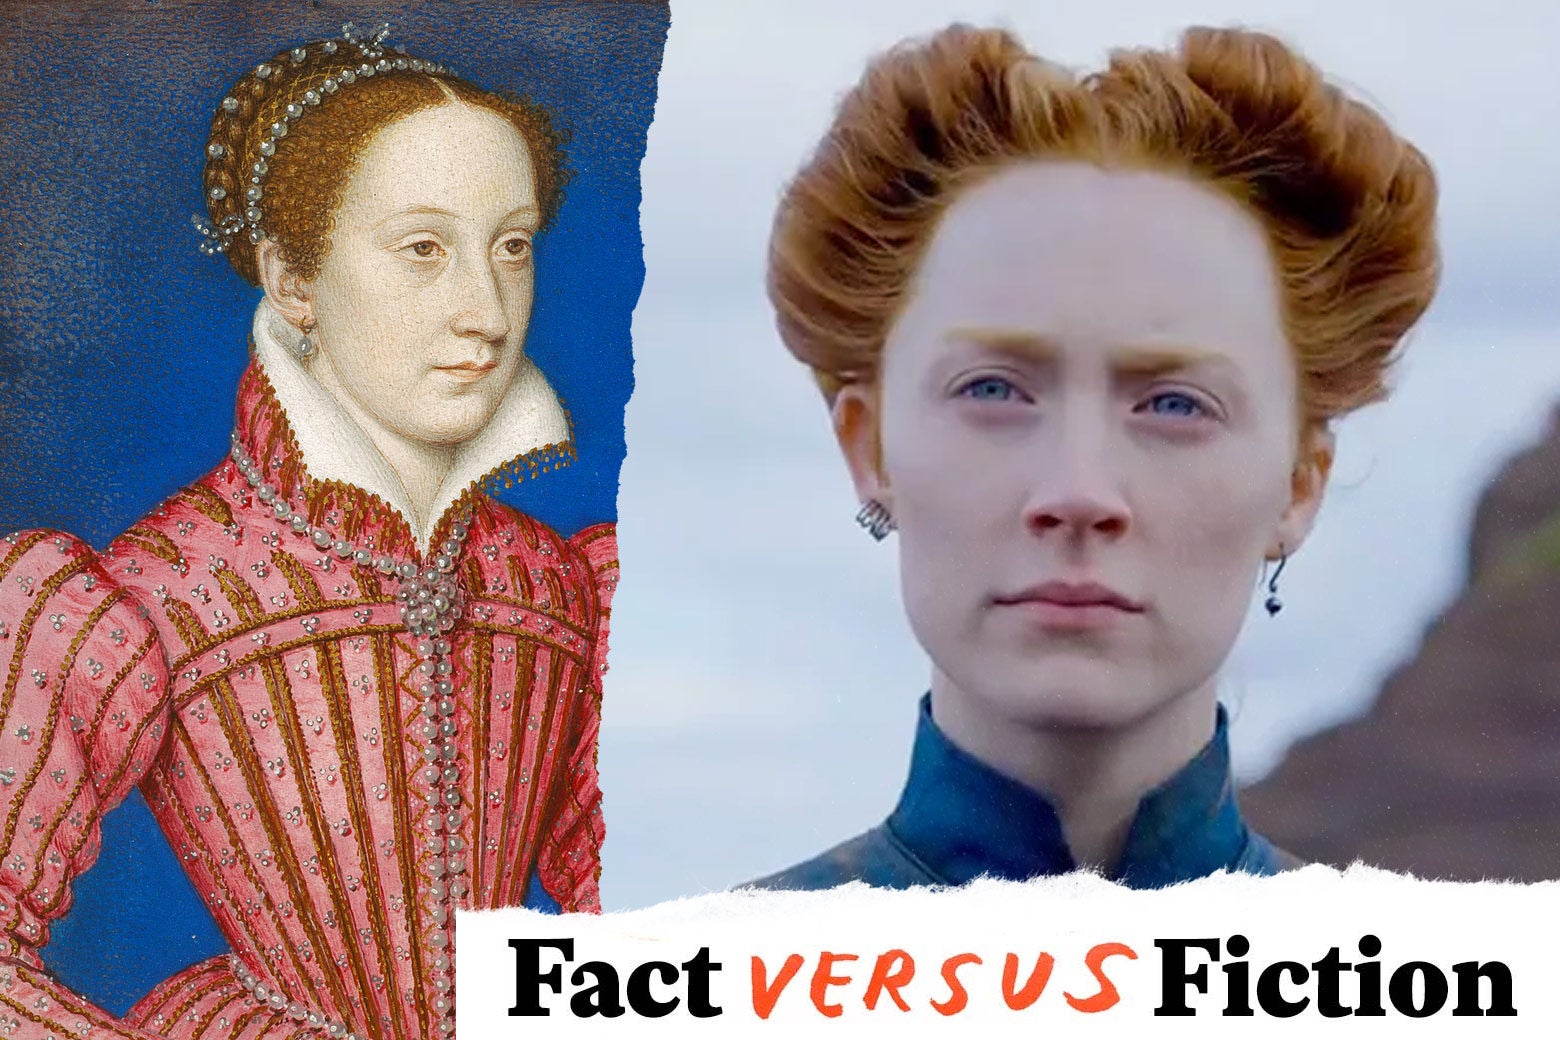 Portrait of Mary, Queen of Scots, and Saoirse Ronan as Mary, Queen of Scots